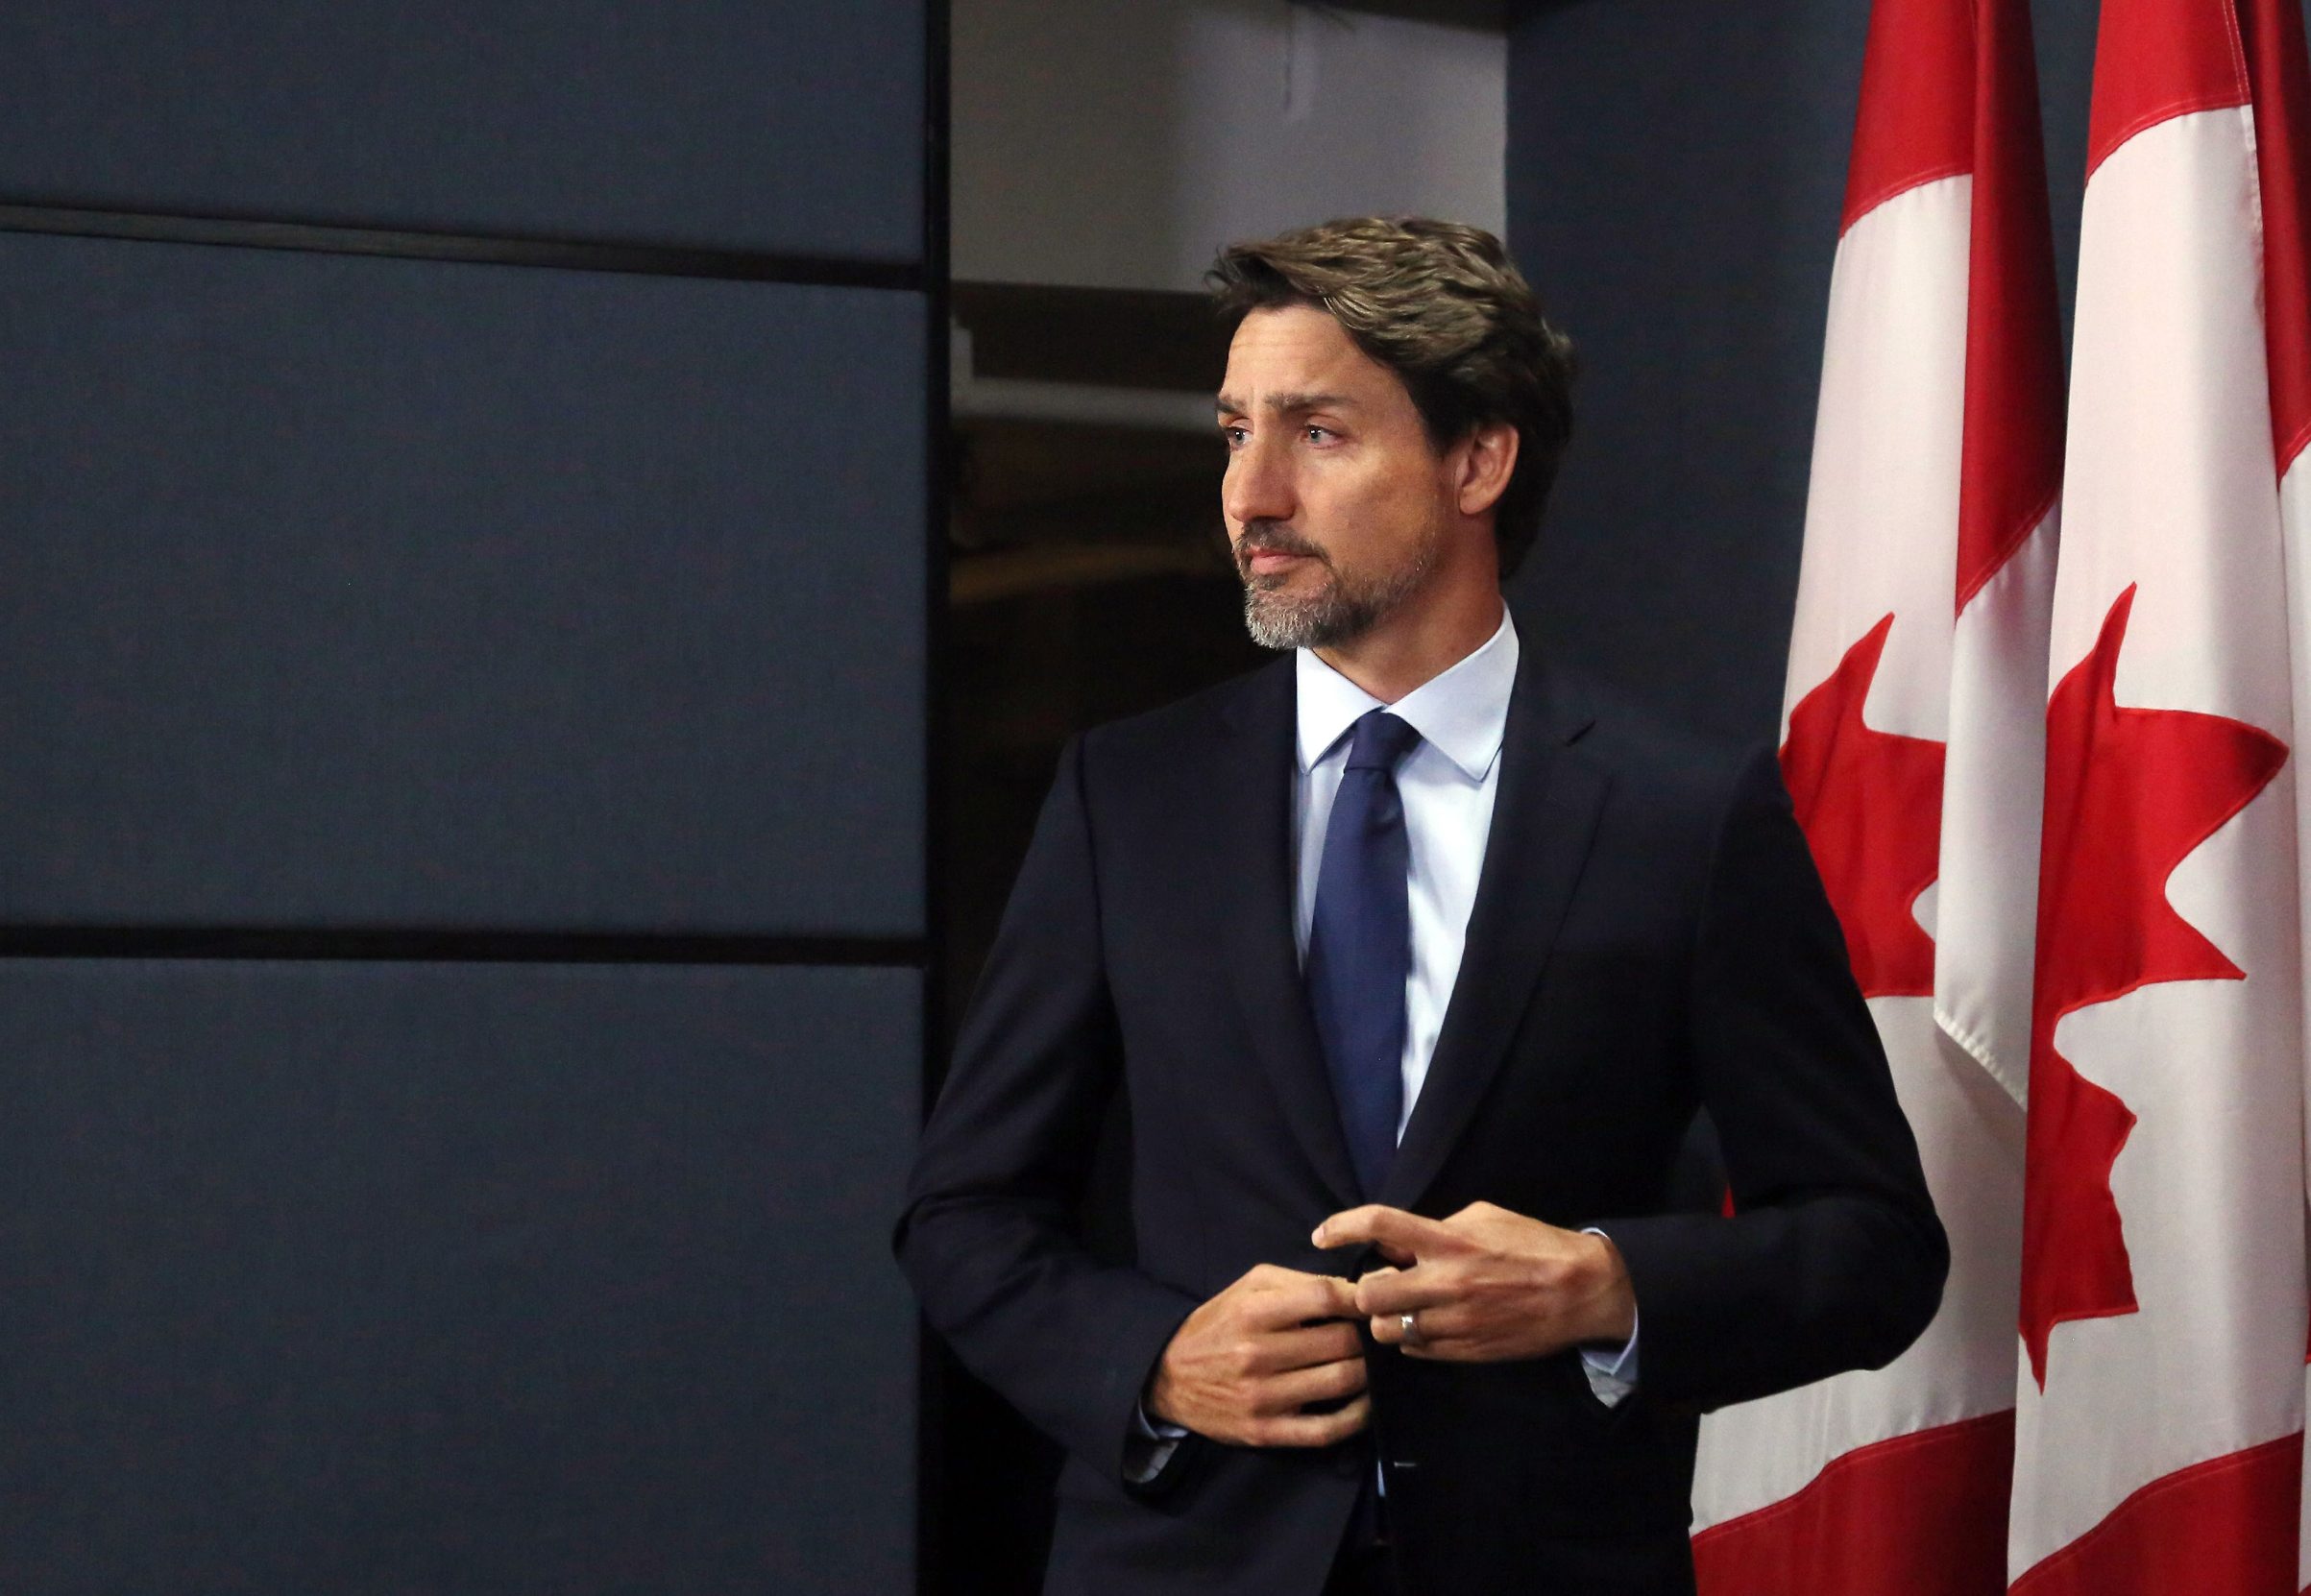 Canadian Prime Minister Justin Trudeau arrives for a news conference January 8, 2020 in Ottawa, Canada. (Photo by Dave Chan / AFP)